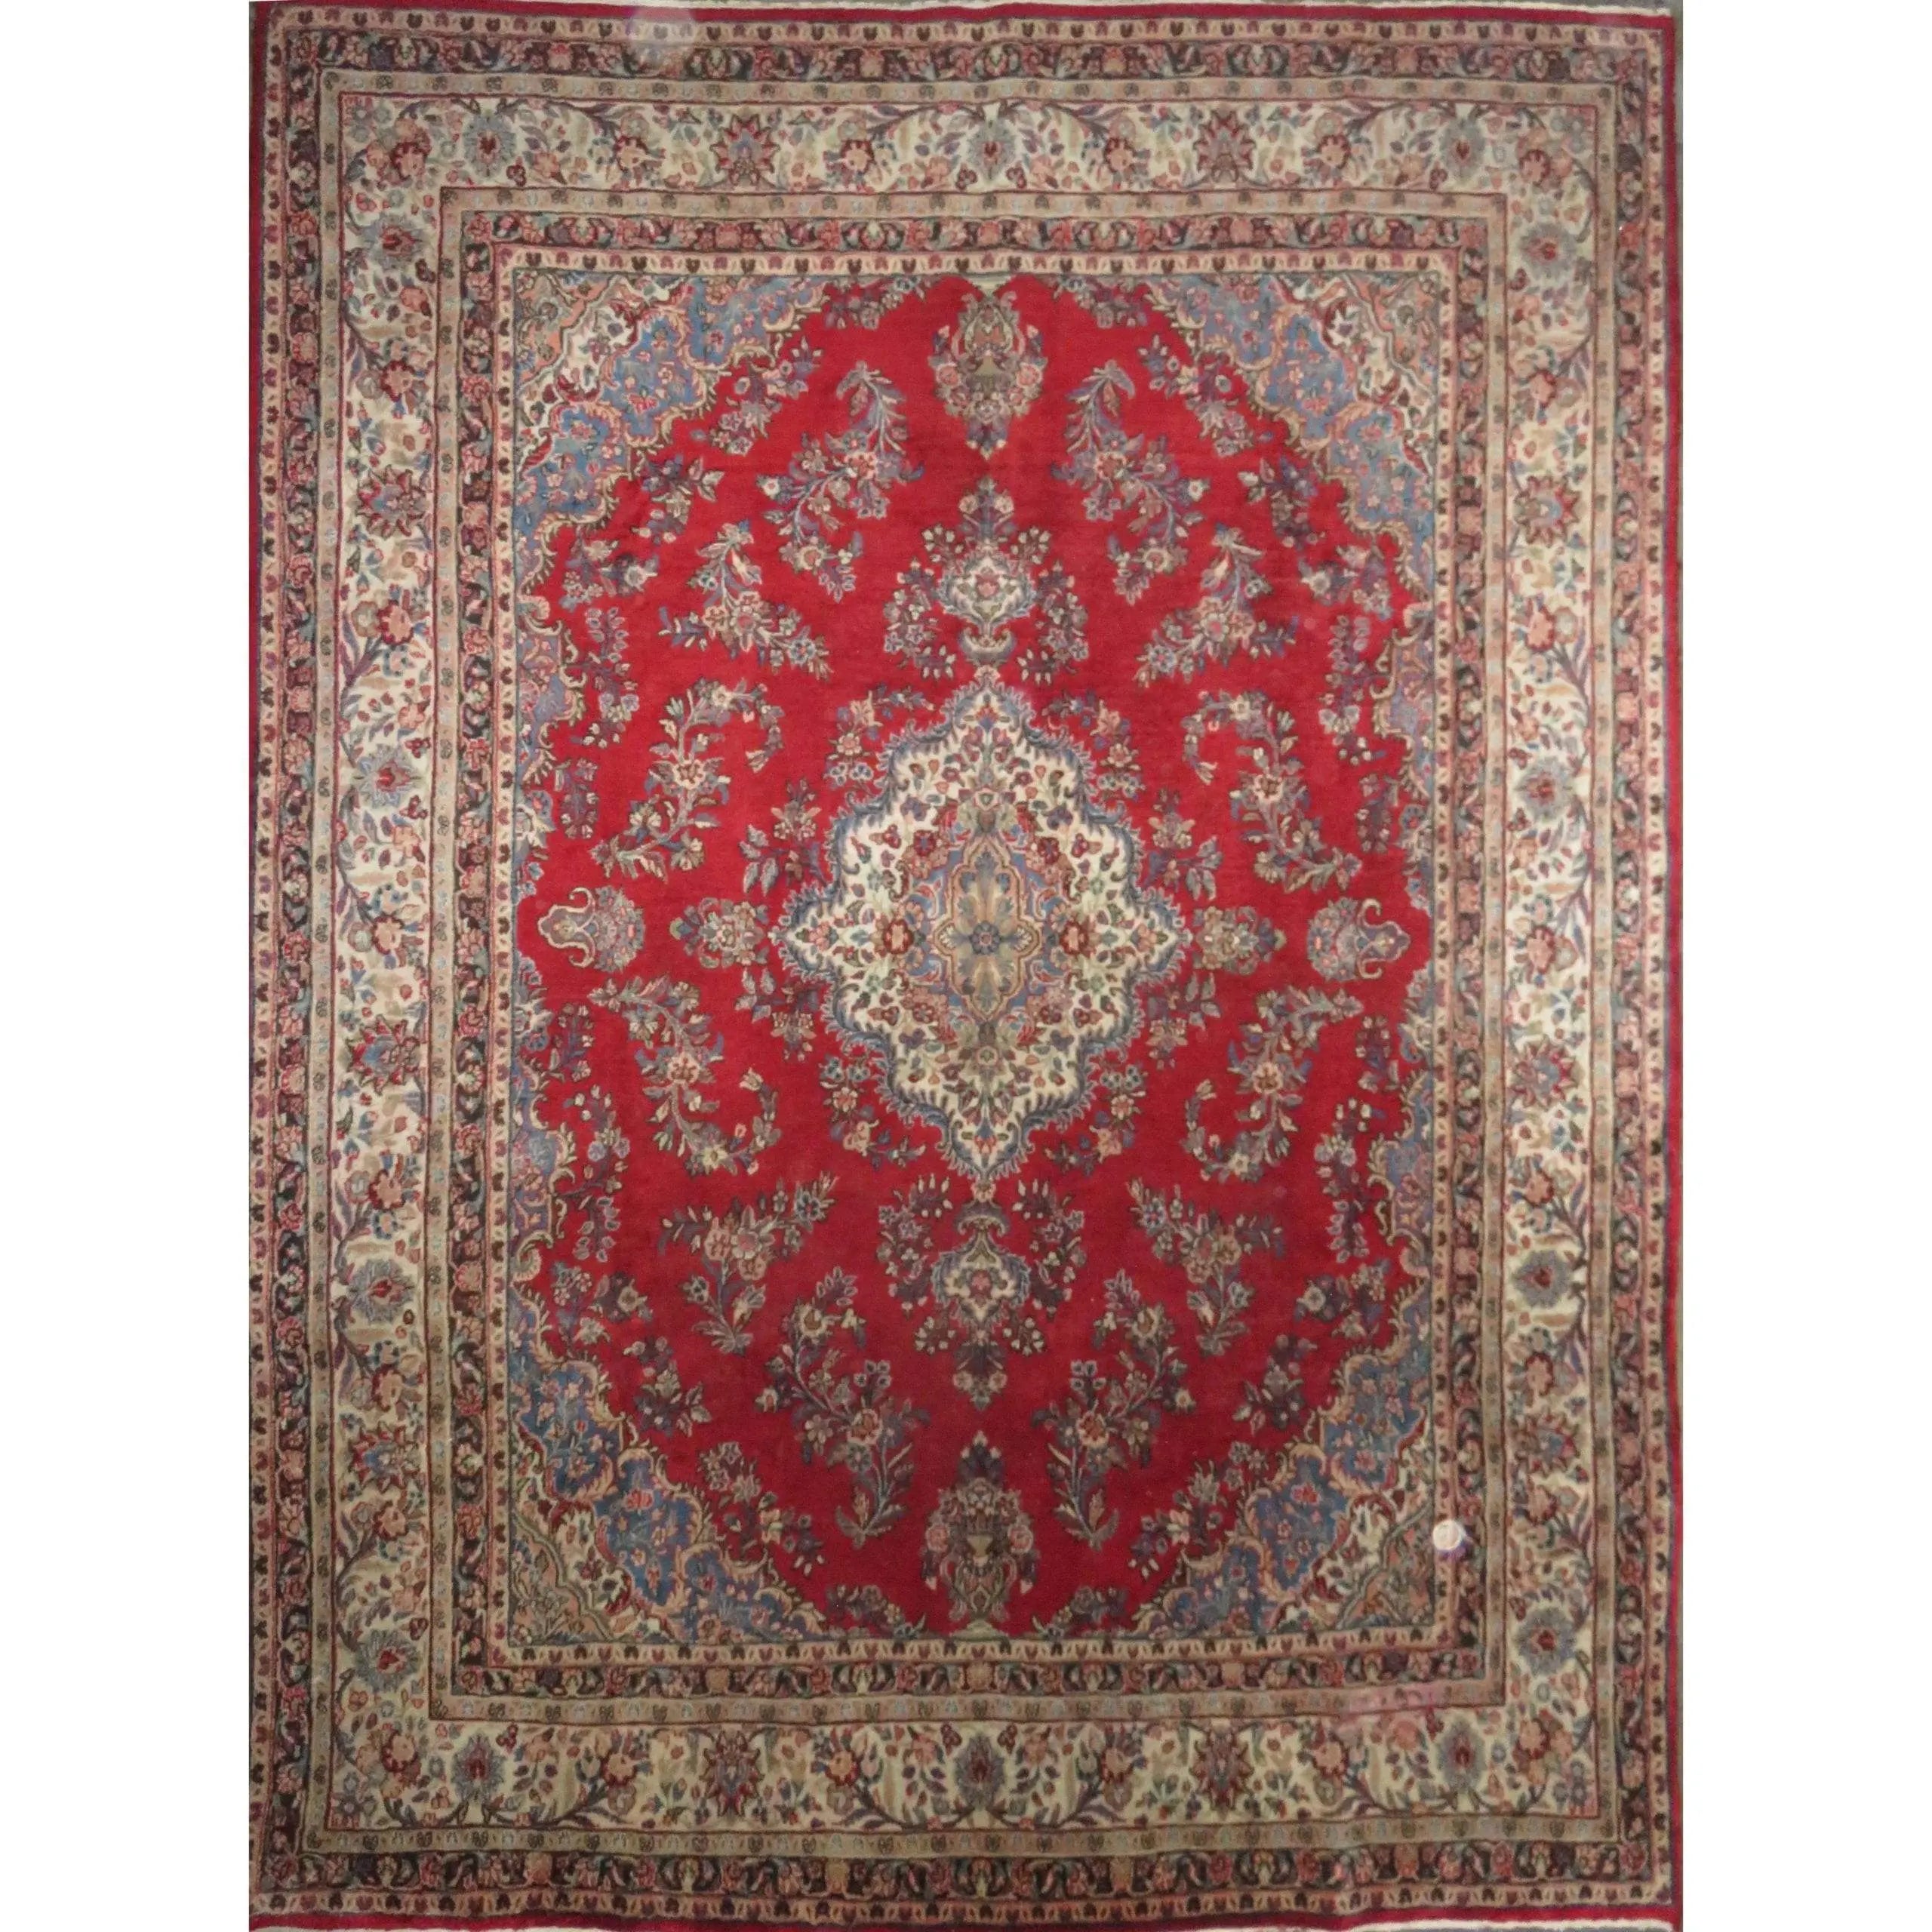 Hand-Knotted Persian Wool Rug _ Luxurious Vintage Design, 13'7" x 10'2", Artisan Crafted